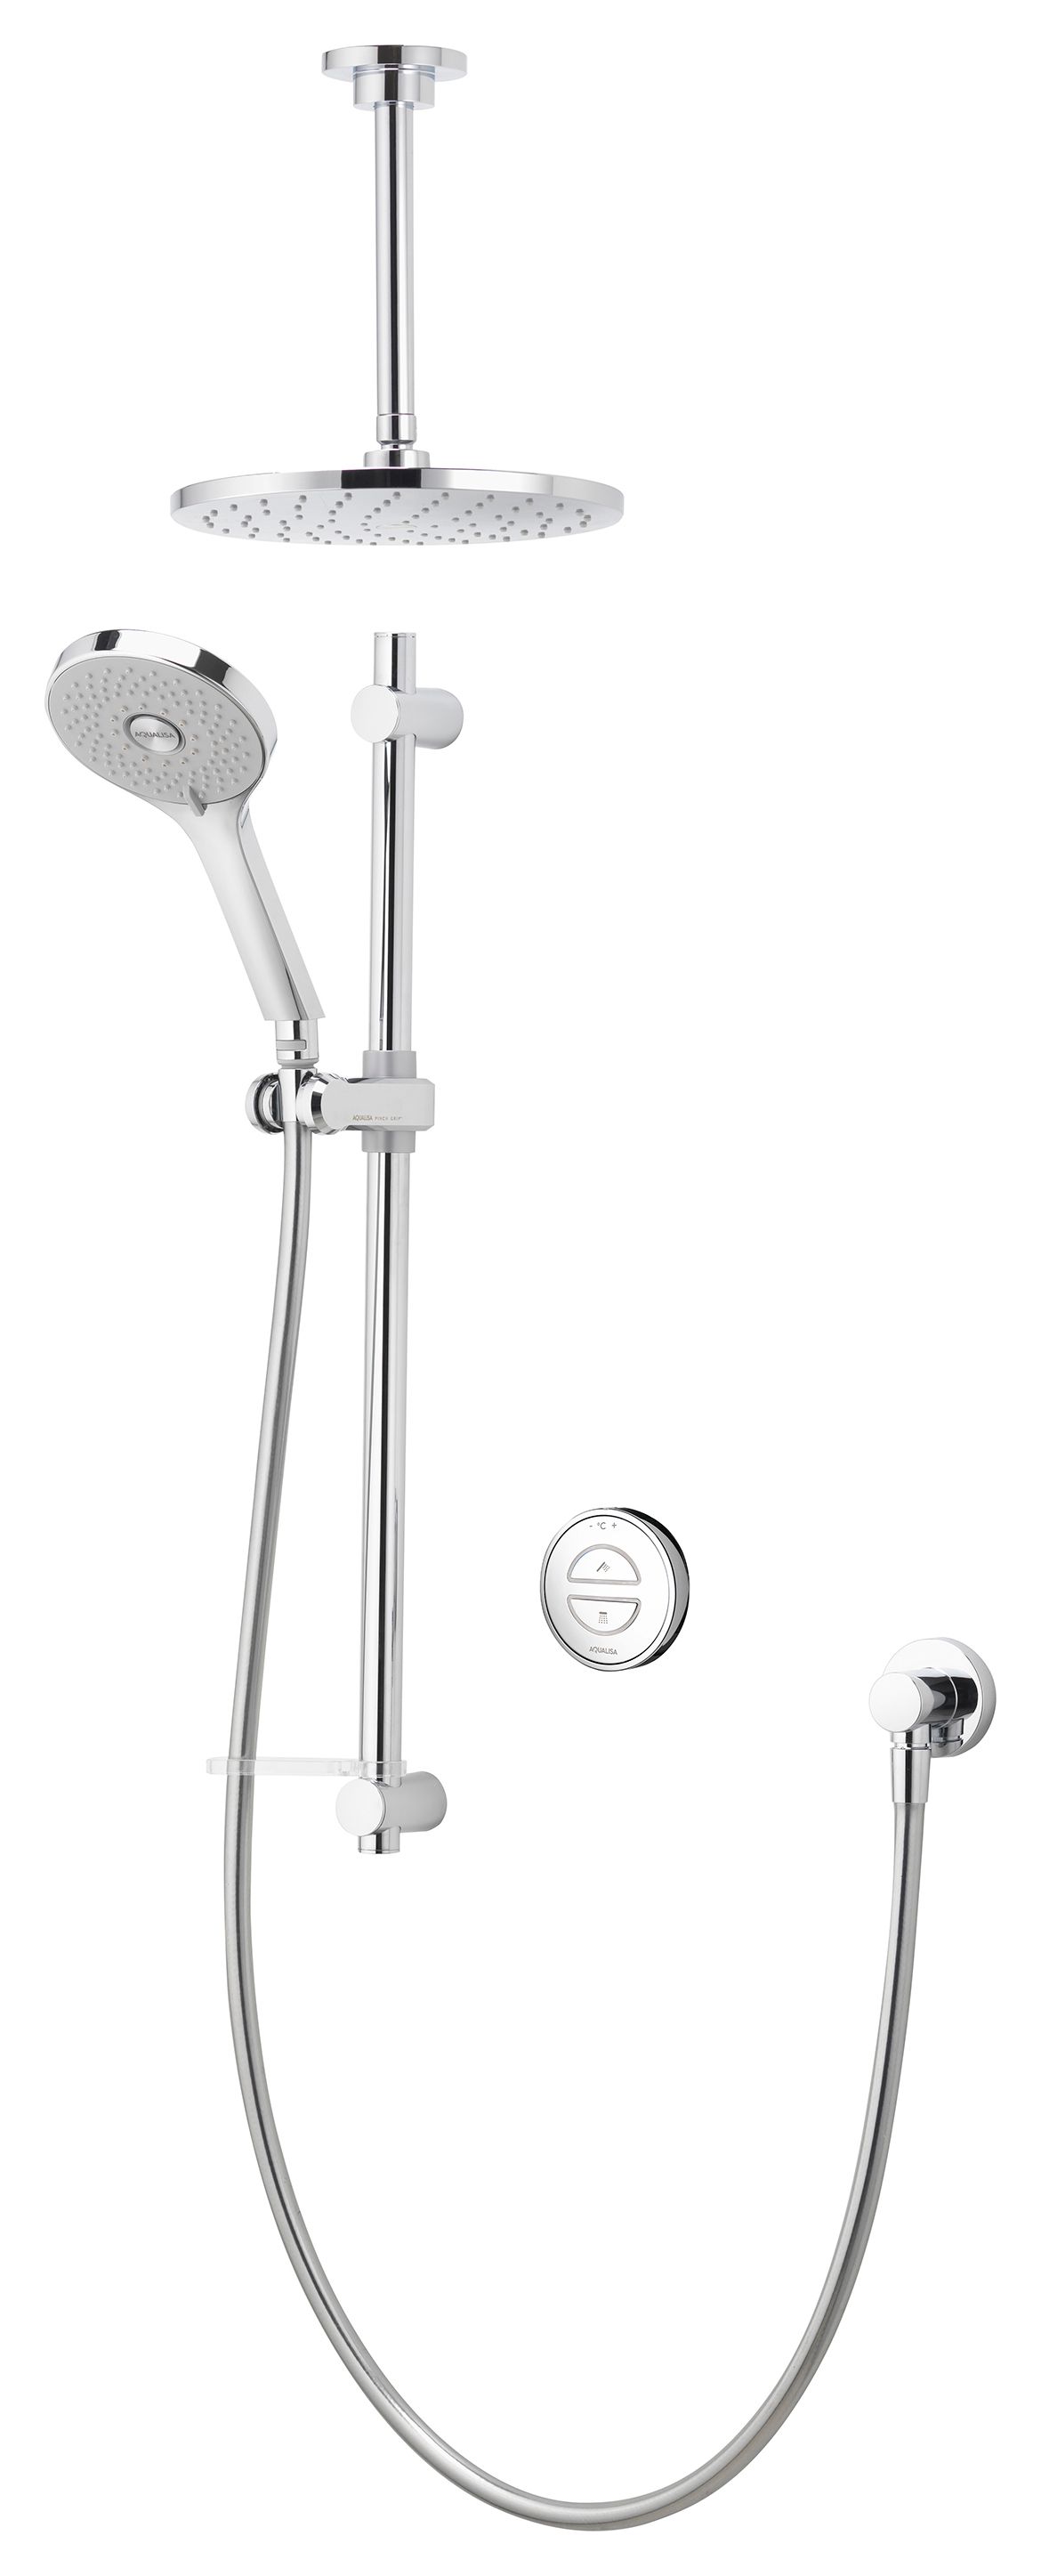 Aqualisa Unity Q Smart Divert Concealed High Pressure Combi Shower with Adjustable & Fixed Ceiling Head